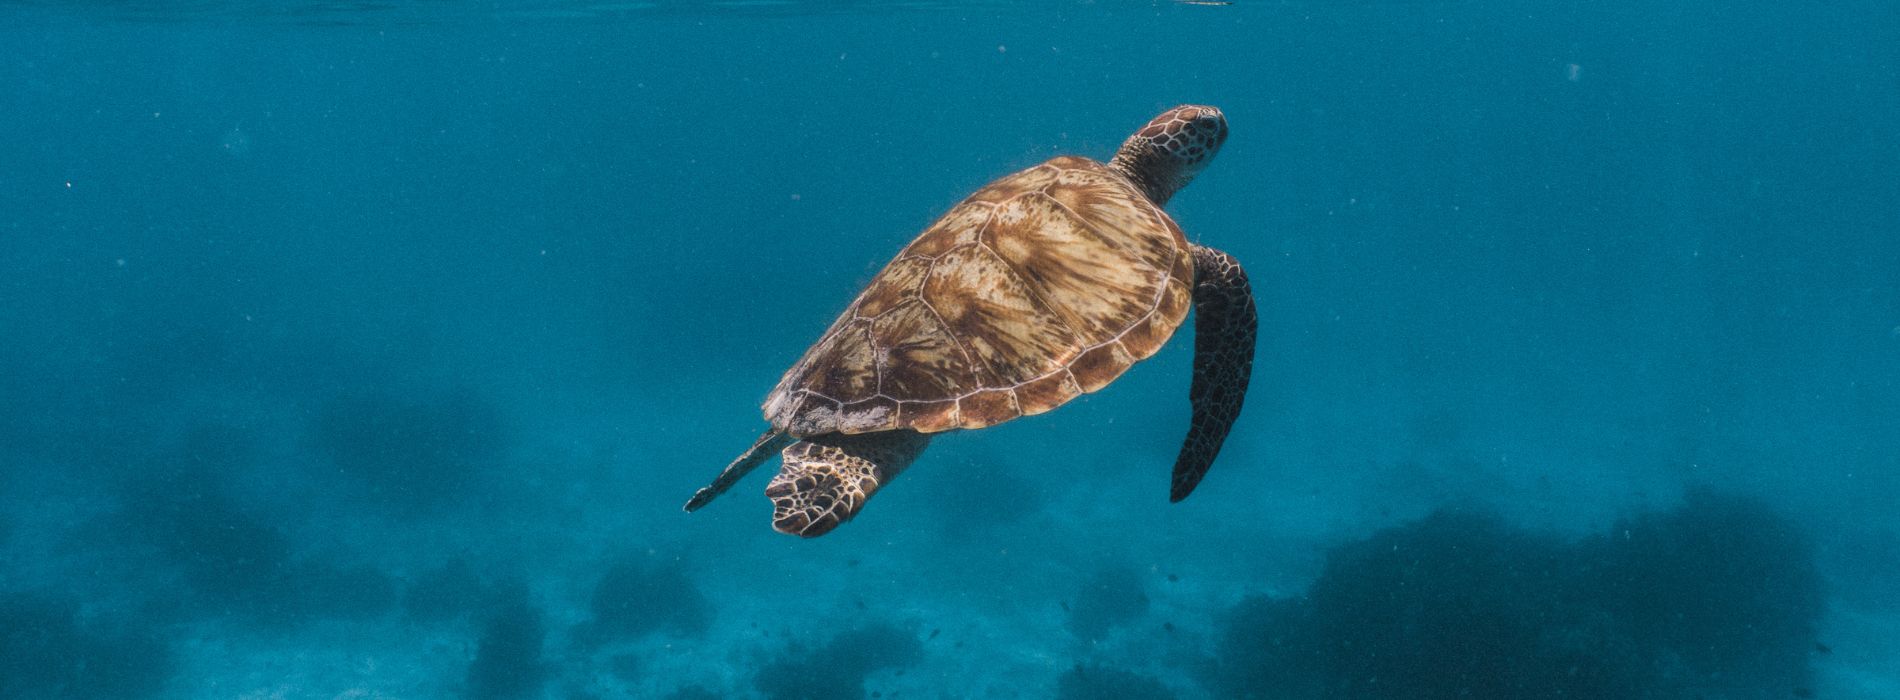 Snorkeling with Sea Turtles in Puerto Rico - Madeinsea©